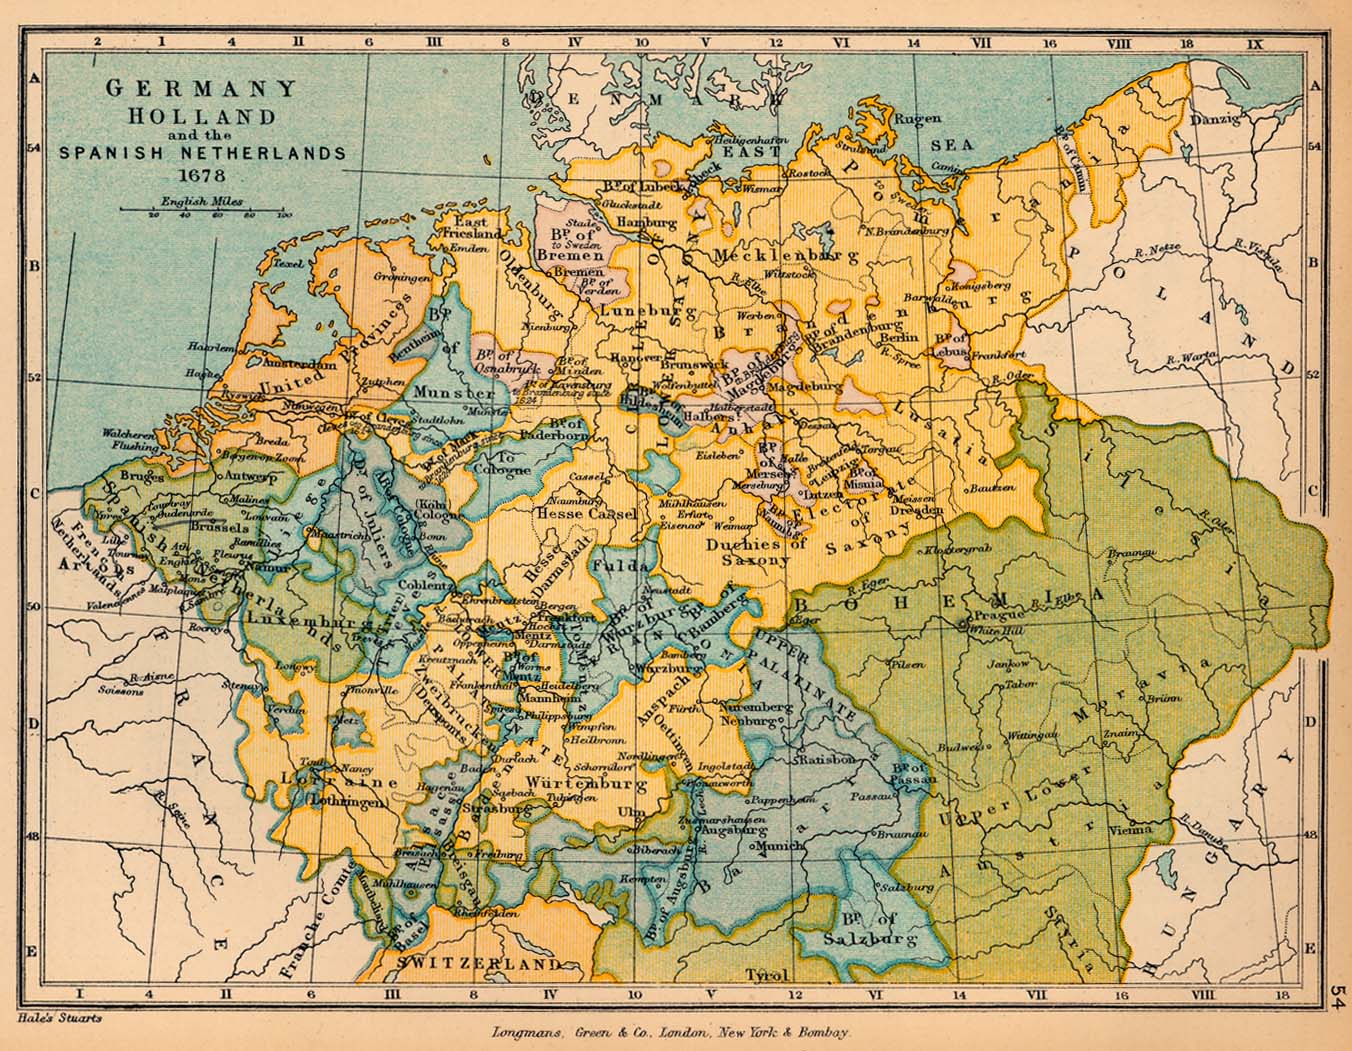 Germany, Holland and the Spanish Netherlands in 1678. Map from page 54 of